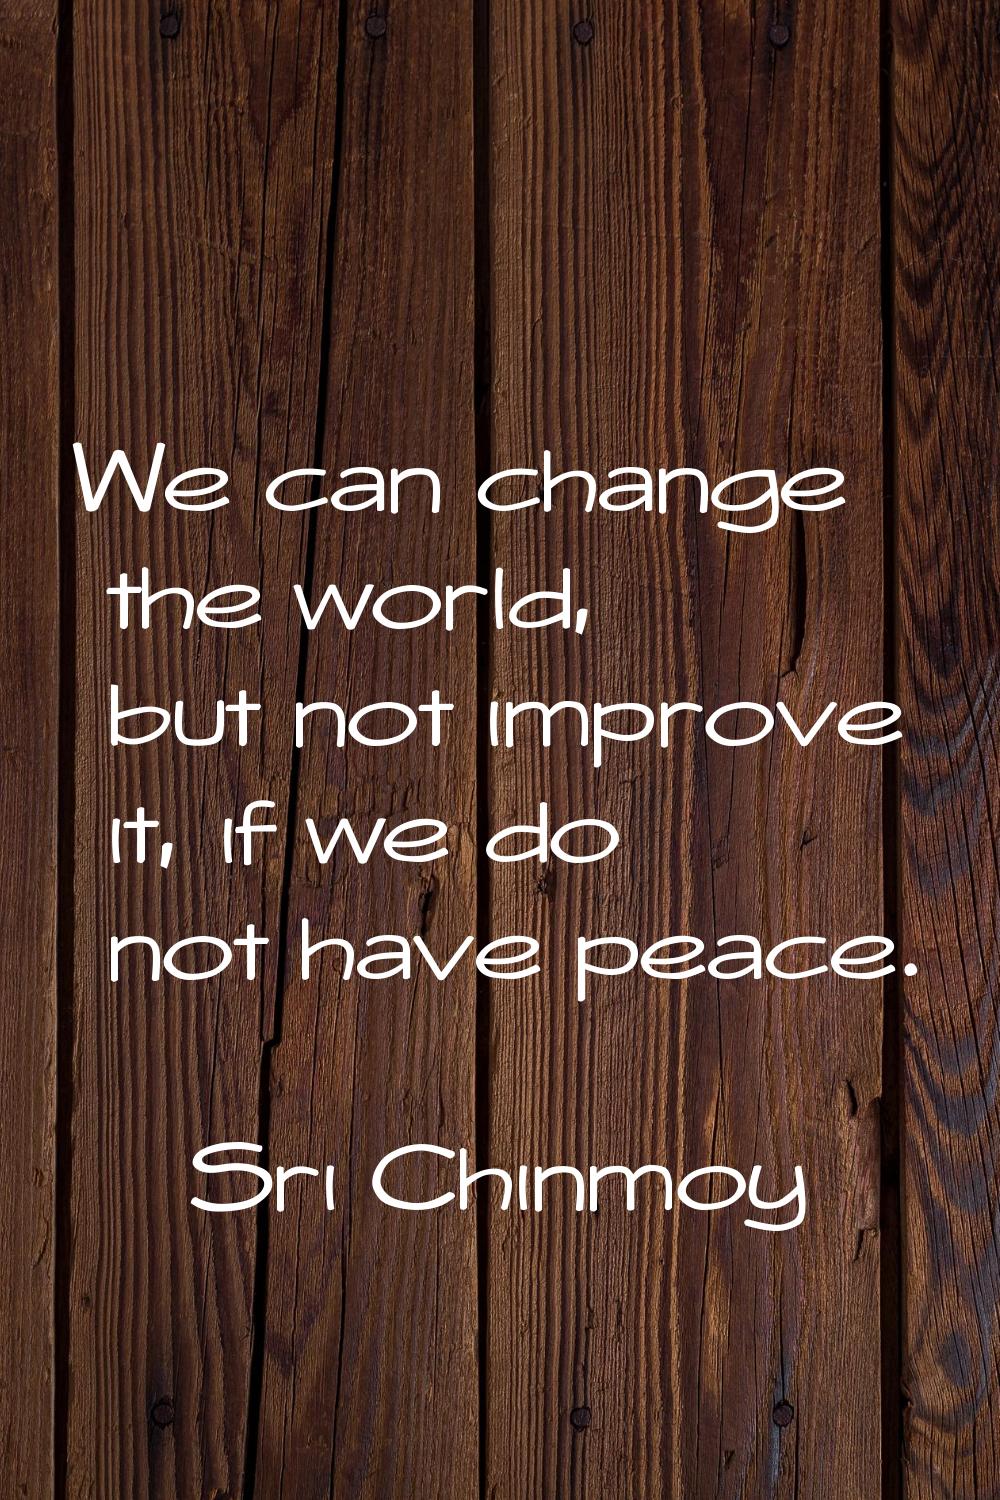 We can change the world, but not improve it, if we do not have peace.